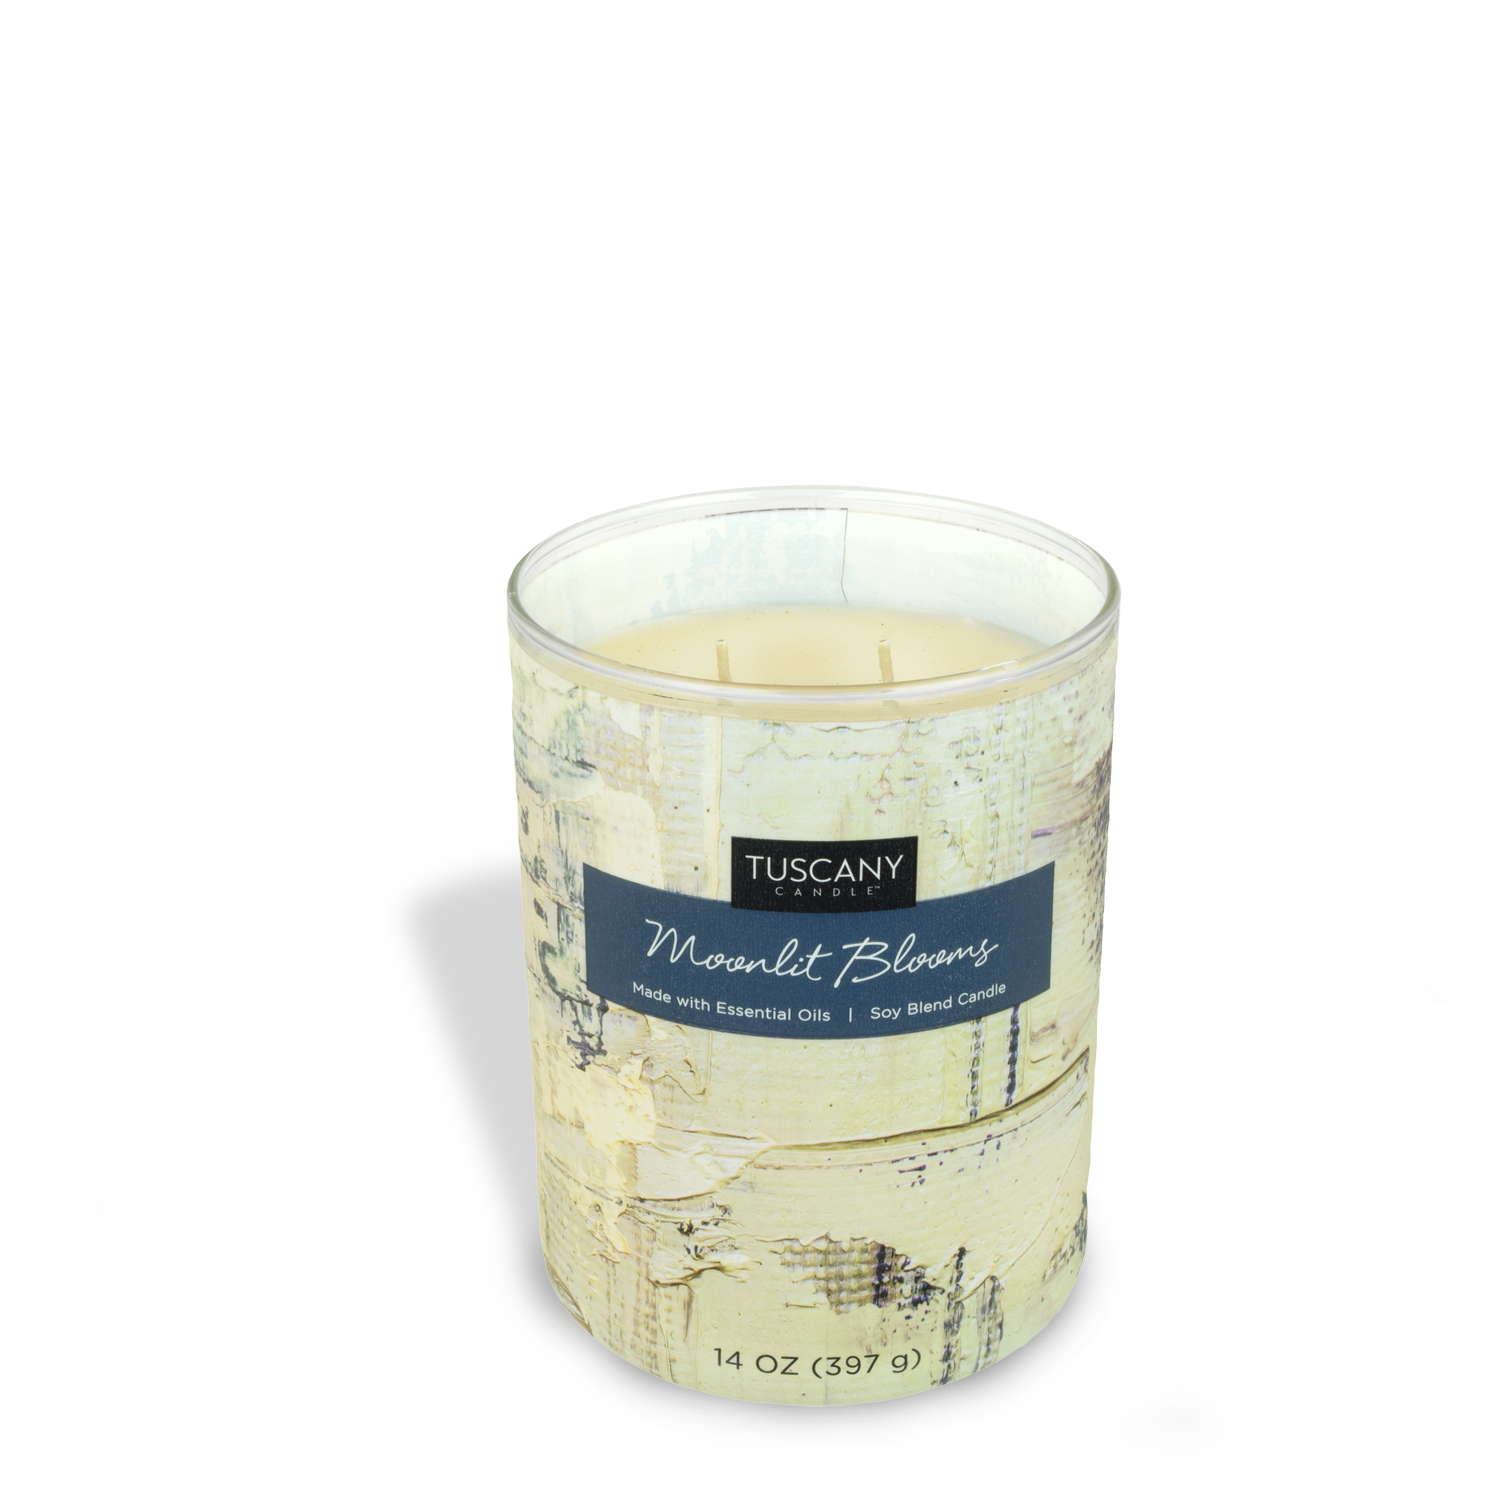 A Tuscany Candle jar with a Moonlit Blooms Scented Jar Candle (14 oz) from the Home Décor Collection, providing a fragrant ambiance to any home décor, all showcased on a clean white background.